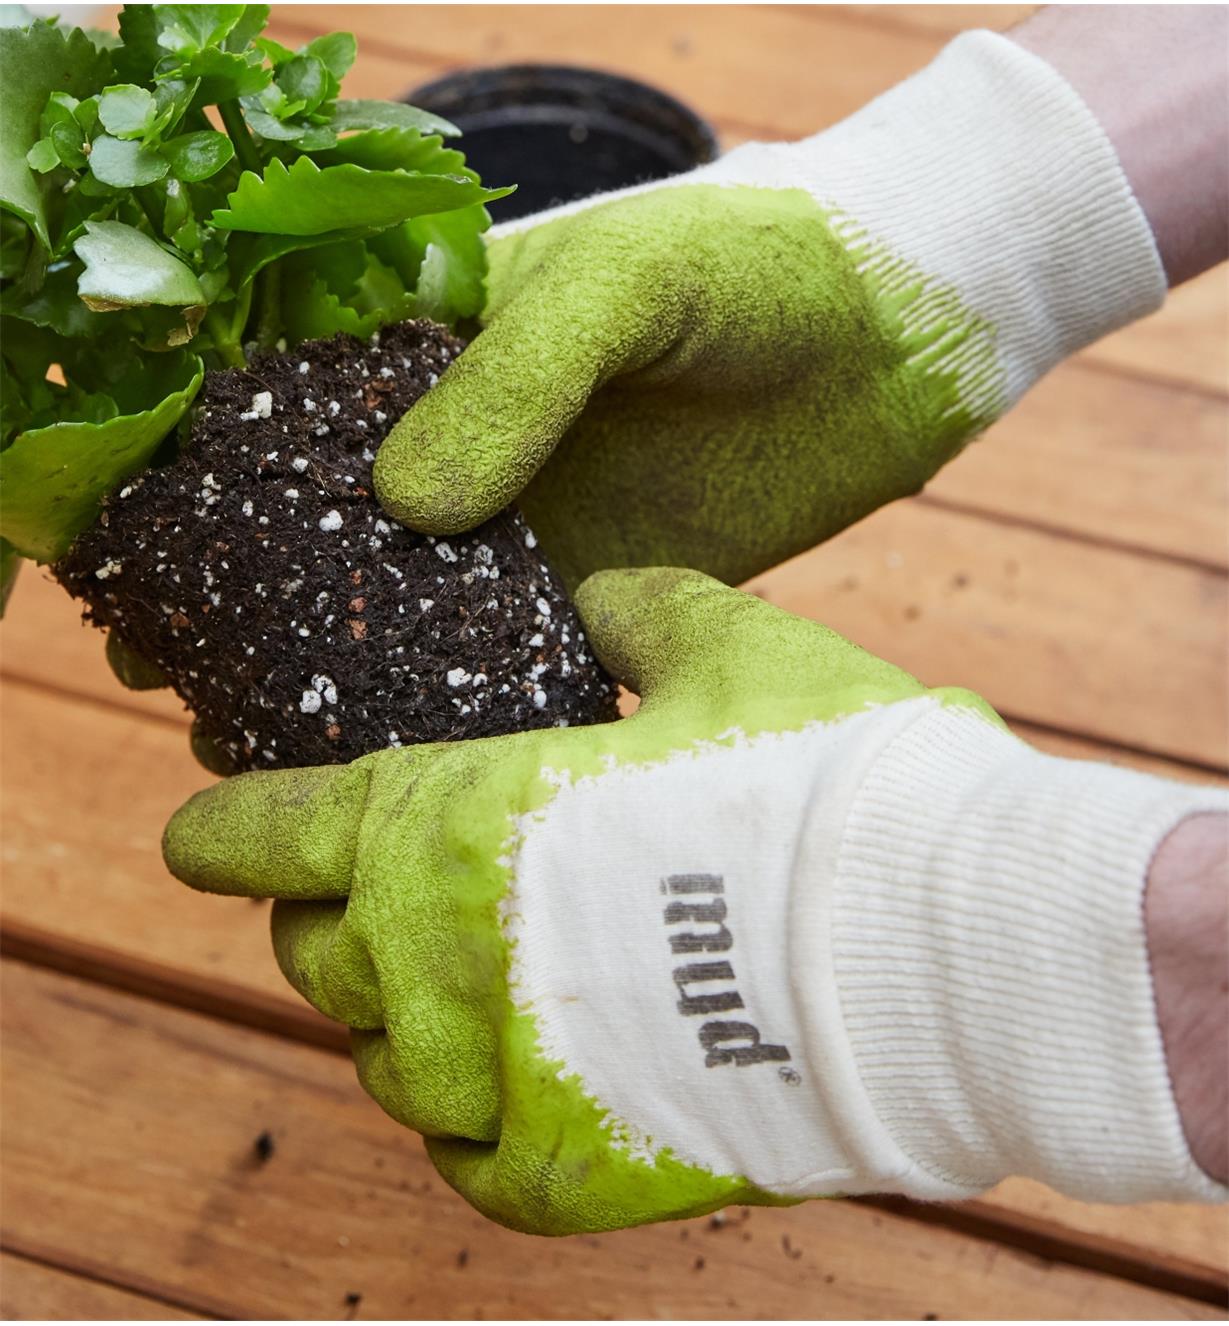 Repotting a plant, wearing mud gloves